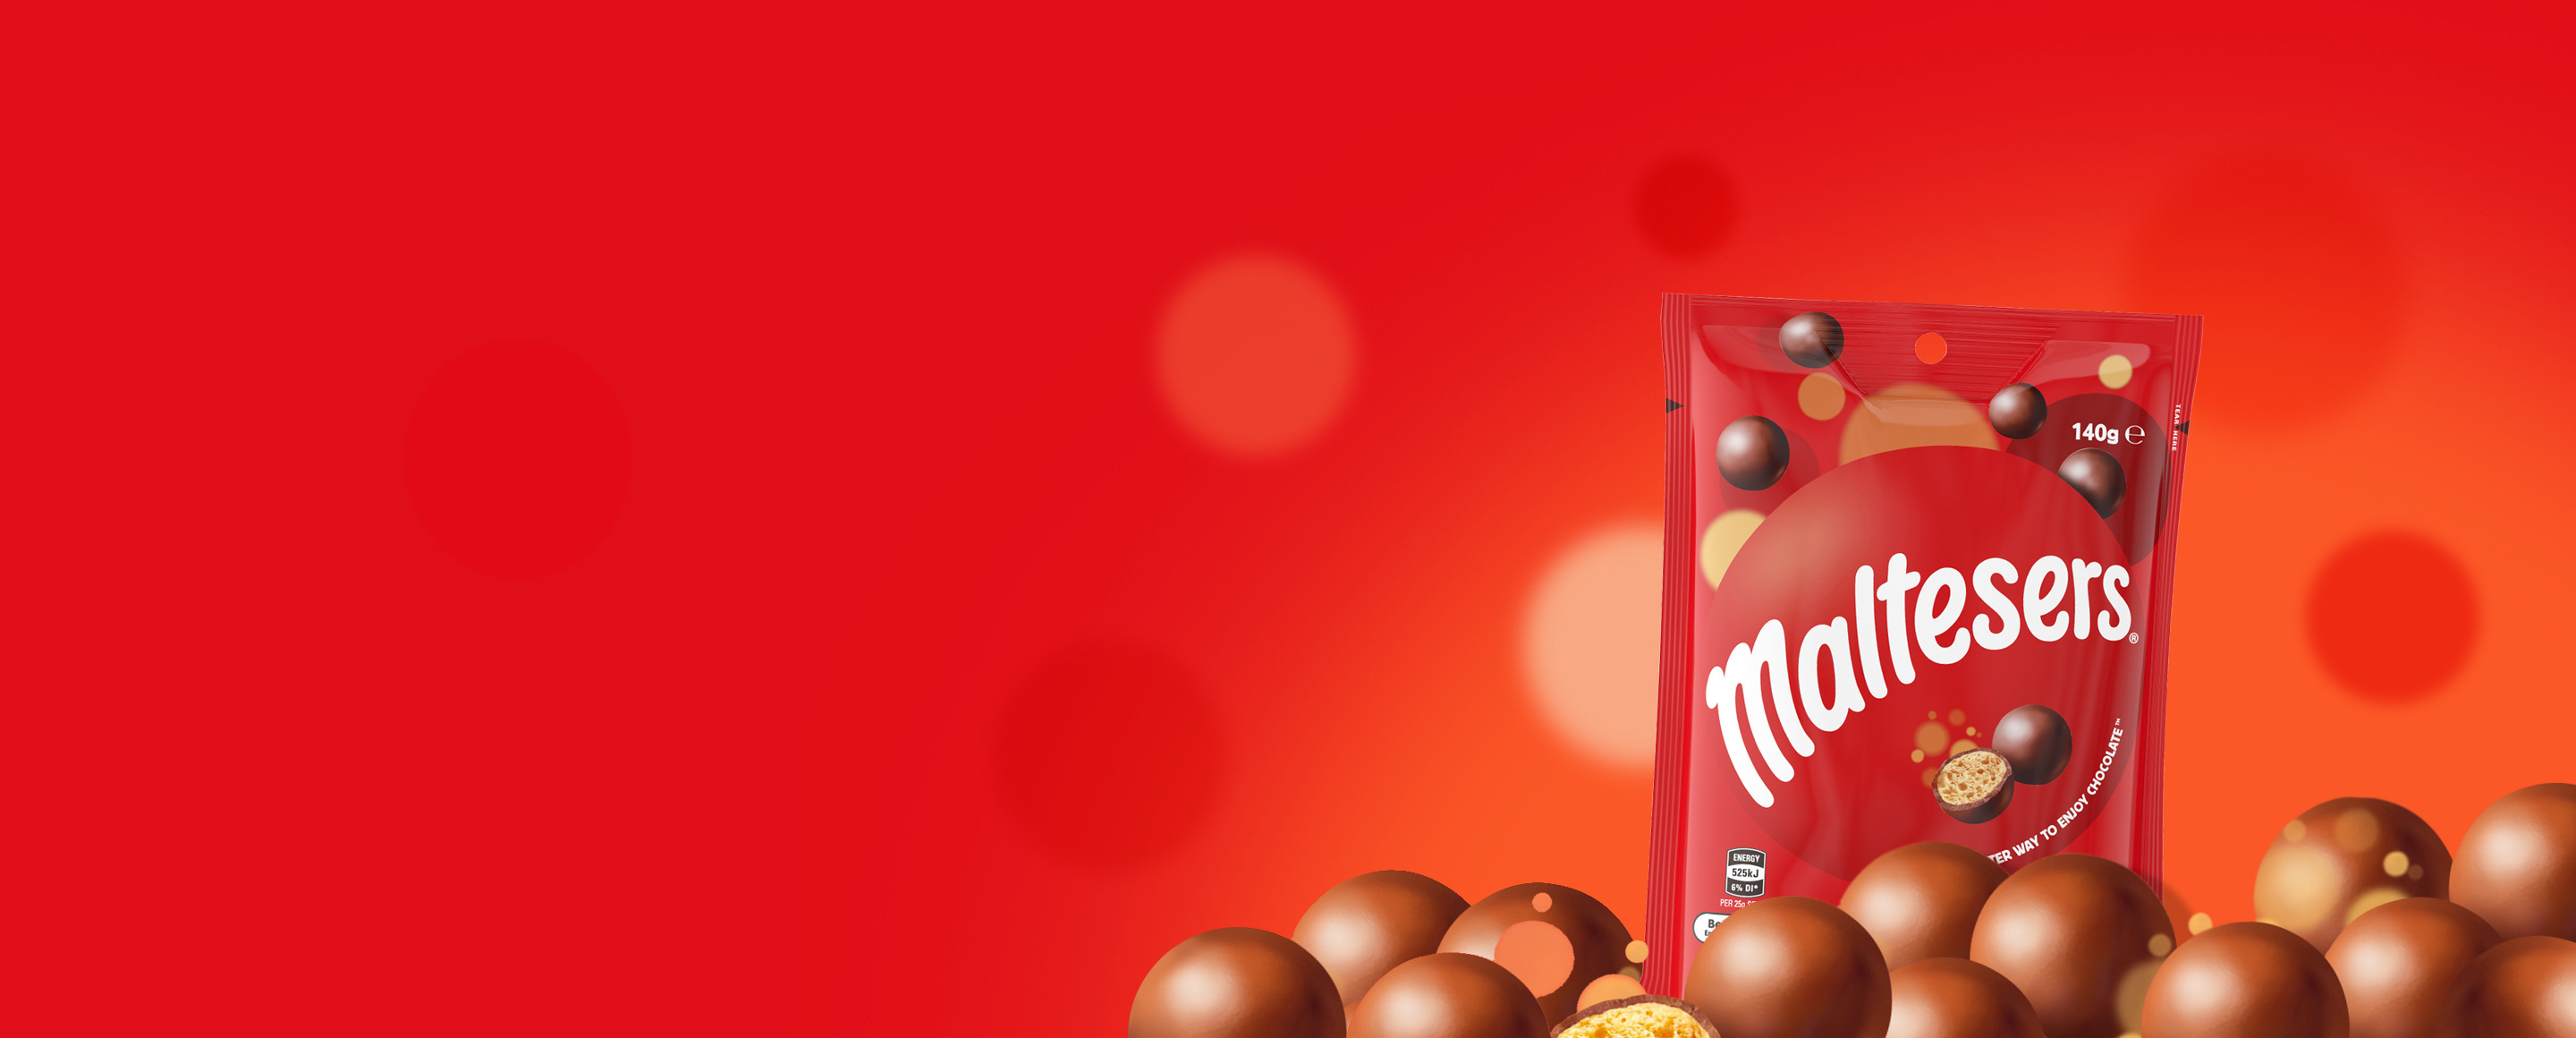 Maltesers bag floating above a pile of Maltesers on a red background with ball pattern